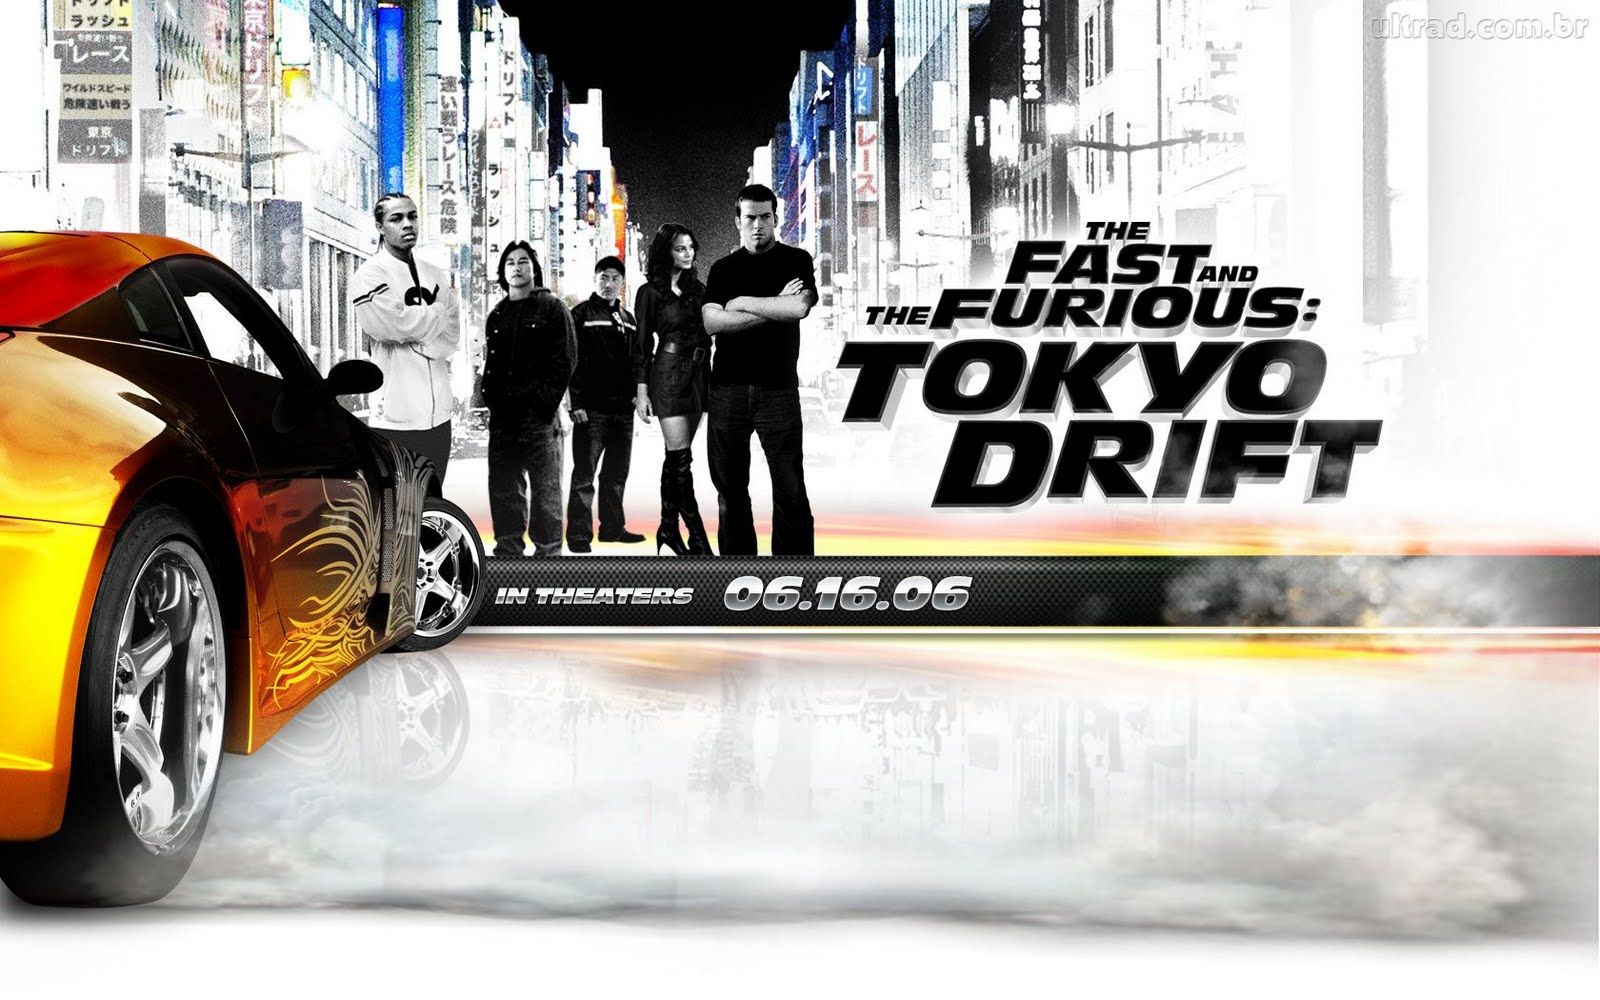 The Fast And The Furious: Tokyo Drift Wallpapers - Wallpaper Cave